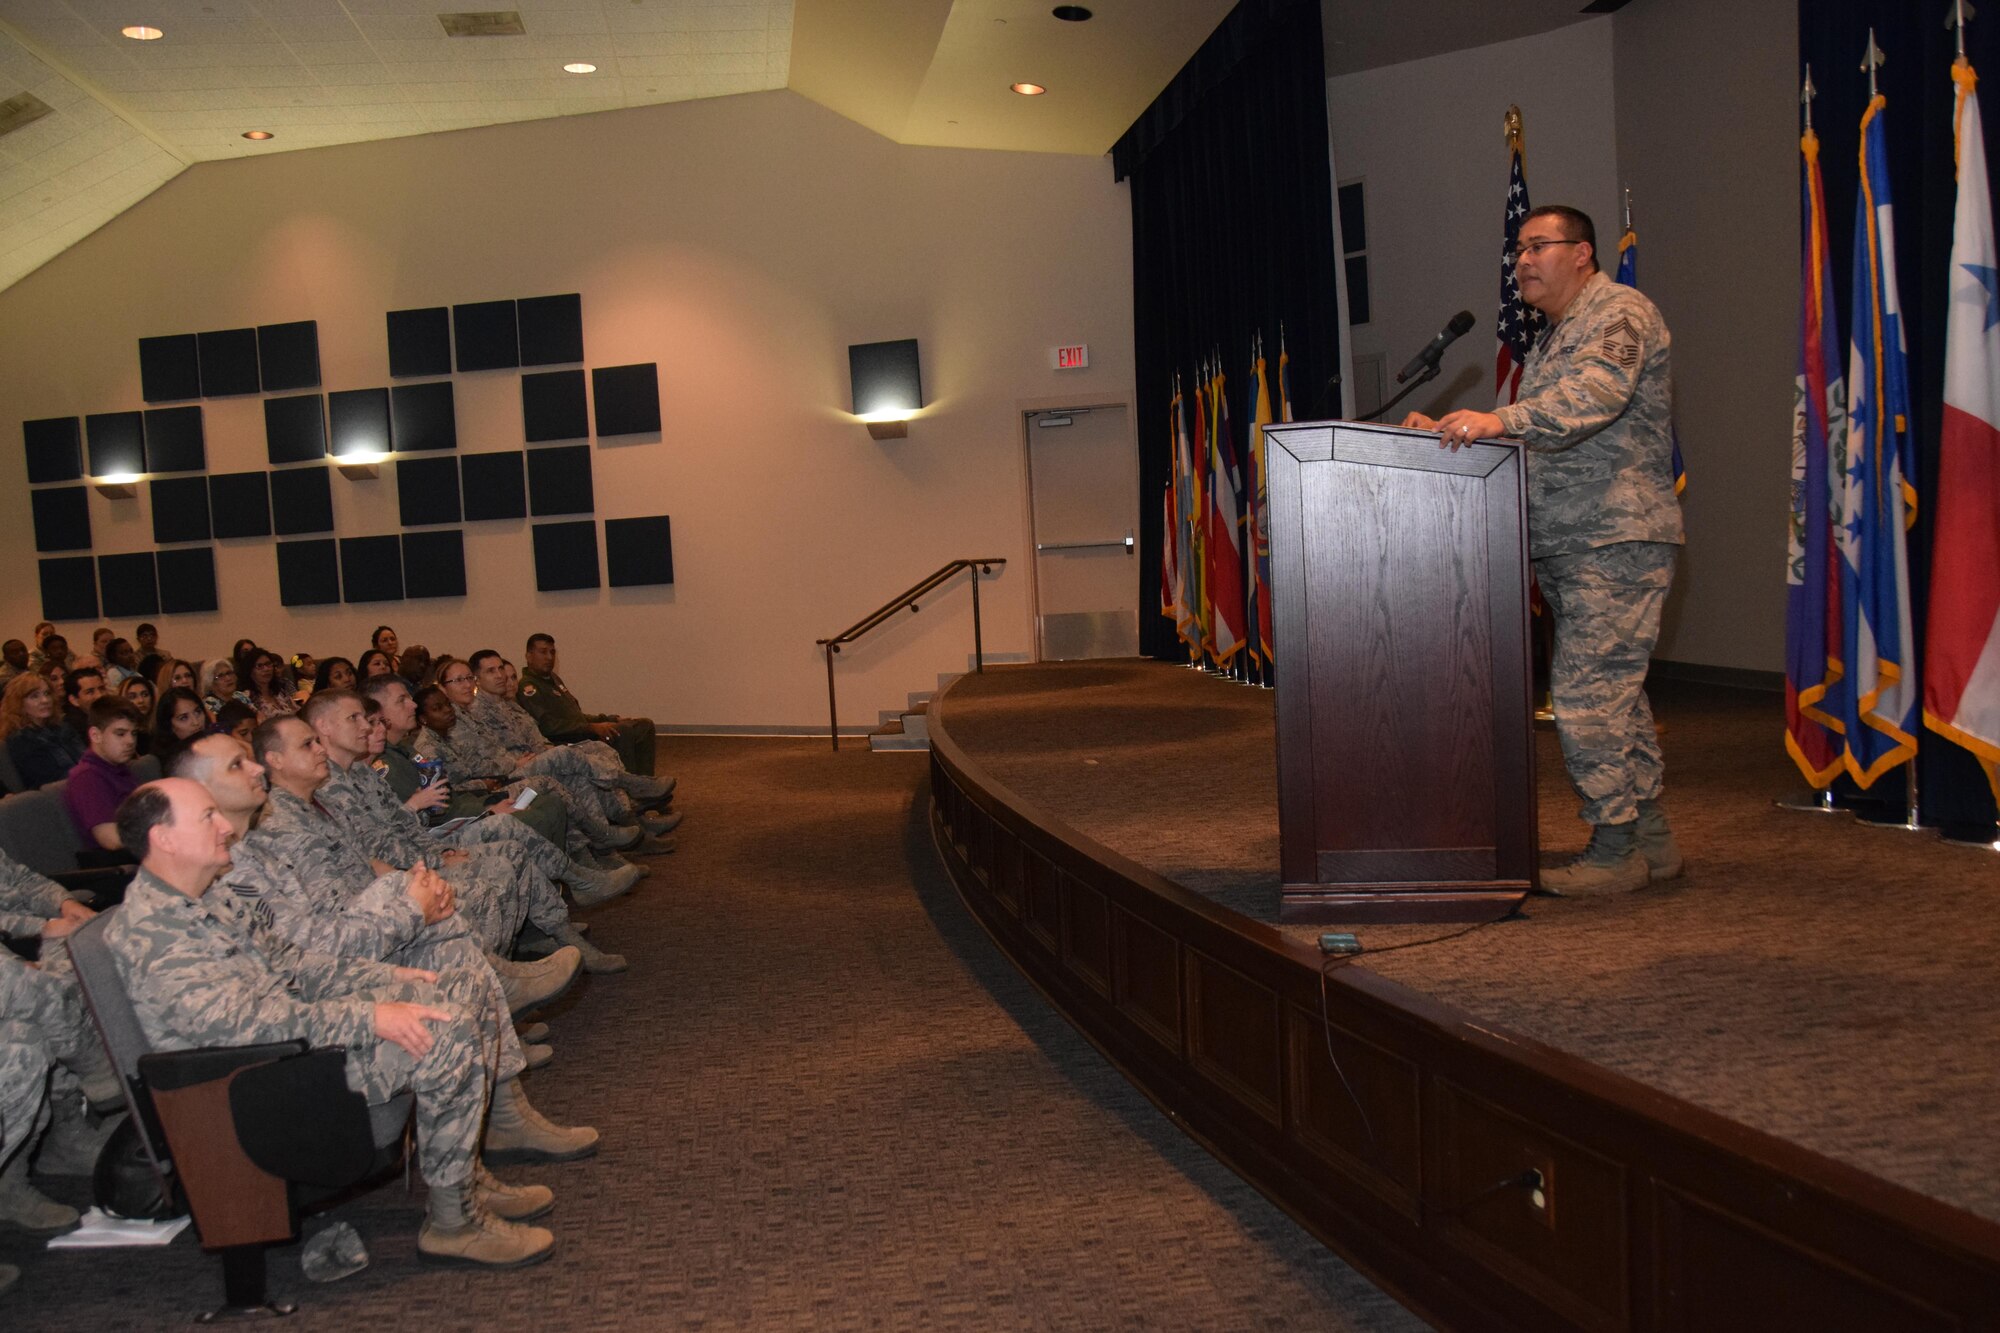 Chief Master Sgt. Christopher Florez, 433rd Medical Squadron medical services superintendent, addresses 433rd Airlift Wing Community College of the Air Force graduates during his commencement speech at the wing's CCAF graduation ceremony Nov. 5, 2016 at the Inter American Air Forces Academy auditorium on Joint Base San Antonio-Lackland, Texas. More than 100 433rd AW Airmen earned their degrees. The CCAF is the world’s largest degree granting institution of higher learning. (U.S. Air Force photo by Tech. Sgt. Carlos J. Treviño)